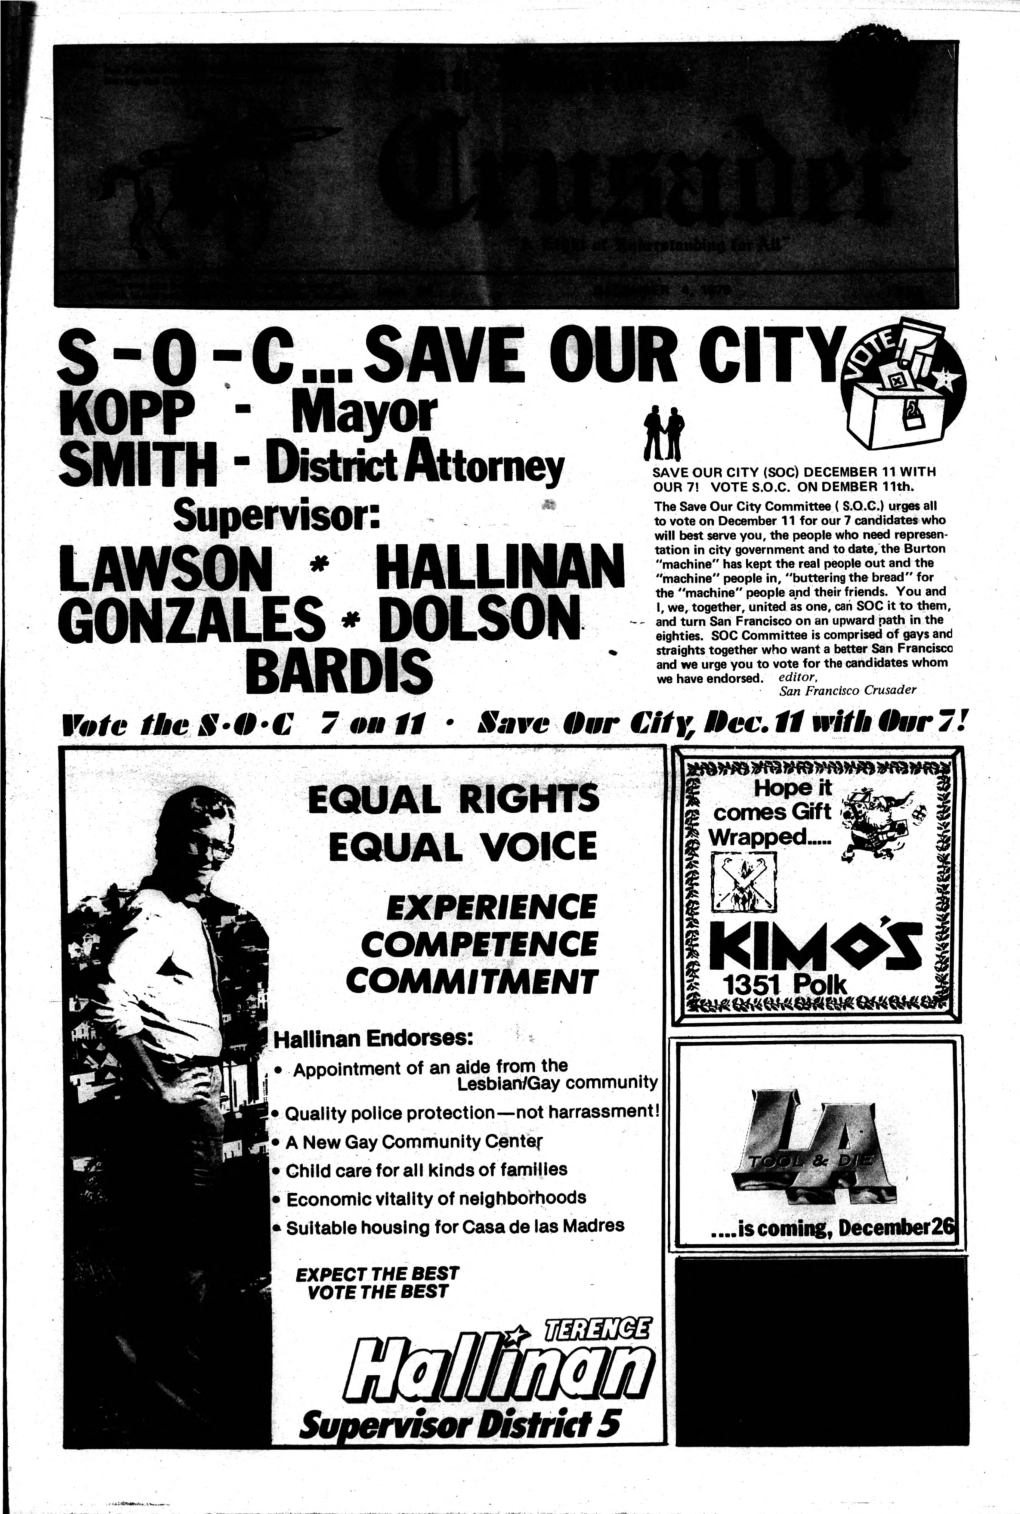 S- 0 -C...SAVE 0 URCITY KO PP - M a Y O R ^ SM ITH ■ District Forney ^SAVE OUR CITY (SOC) DECEMBER 11 with OUR 7! VOTE S.O.C